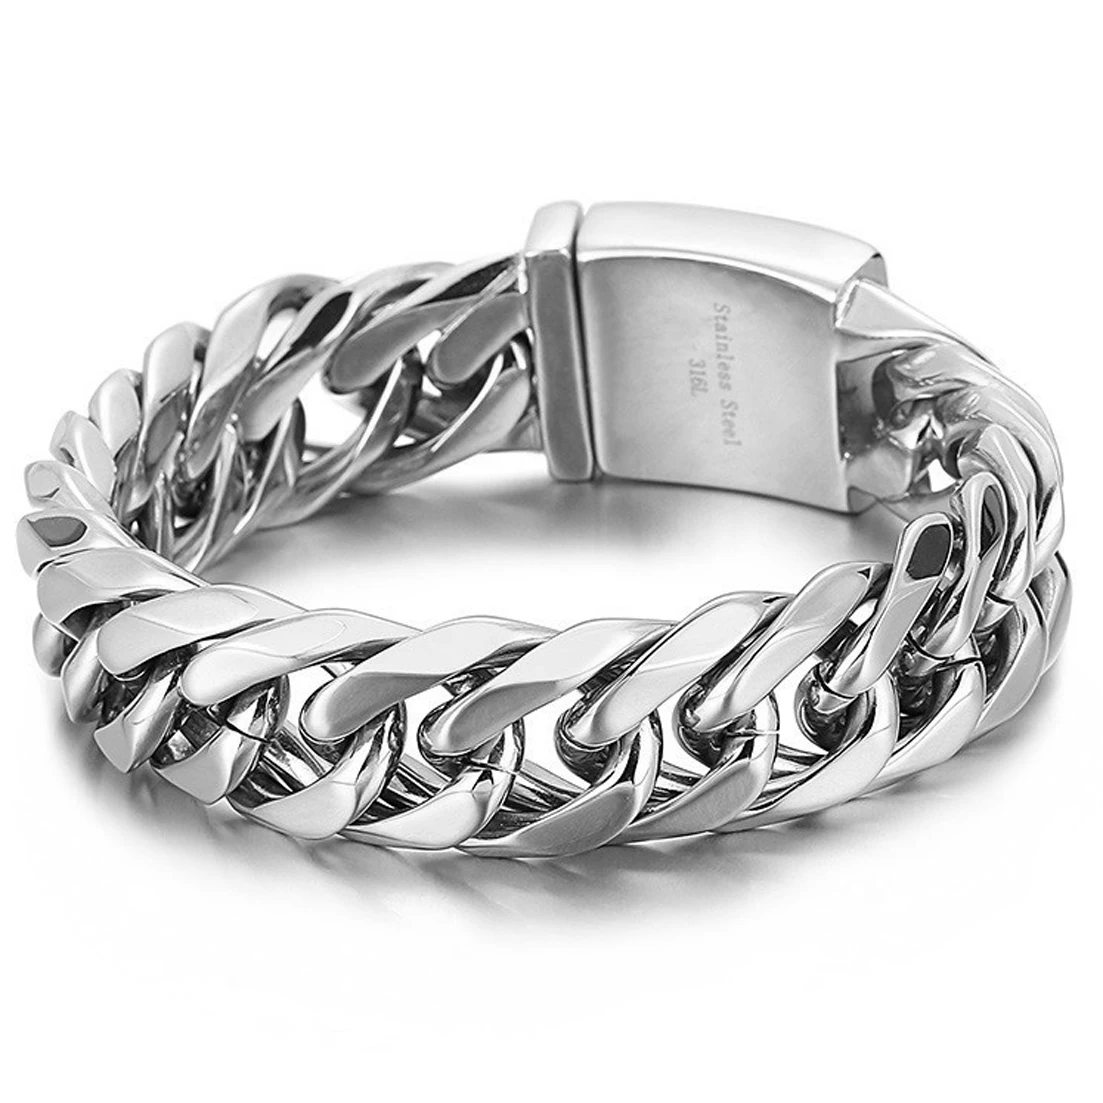 

Granny Chic Men's 16MM Wide Heavy Duty Silver Tone Real 316L Stainless Steel Curb Cuban Link Chain Bracelet Bangle 7-11inch